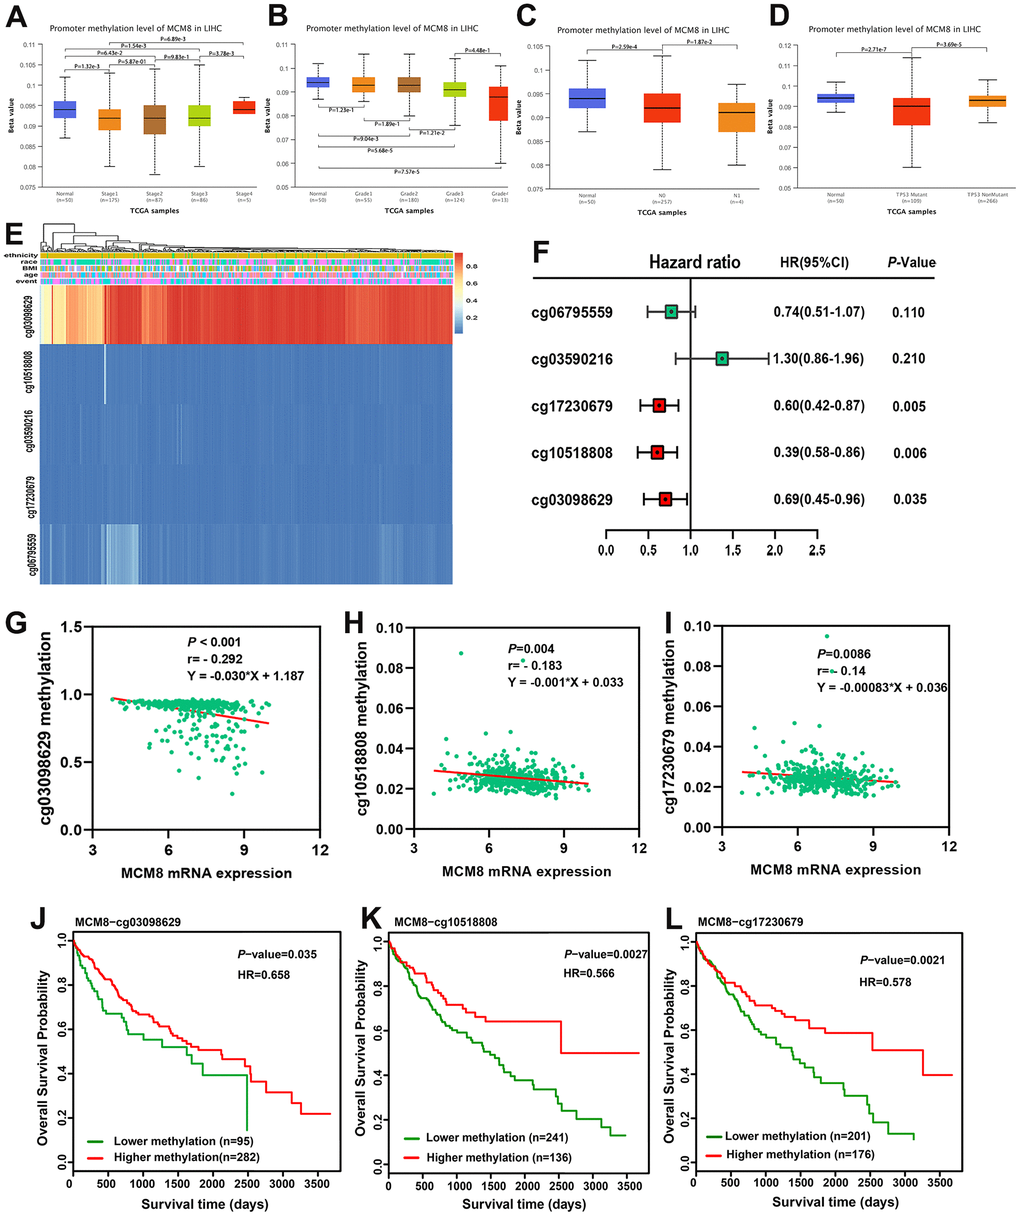 Hypomethylation status correlated with upregulation of MCM8 expression and poor survival in HCC patients. (A, B) DNA methylation level of MCM8 gradually decreased with the progression of tumor stages (A) and histologic grades (B). (C) The MCM8 methylation level is lower in metastatic lymph nodes than without metastasis. (D) The MCM8 methylation level is lower in HCC with TP53 mutation. (E) The heat map shows CCT7-related methylated CpG sites in HCC. (F) Methylation level of three CpG sites were associated with overall survival times of HCC patients. (G–I) MCM8 mRNA expression negatively correlated with methylation levels of cg03098629 (G), cg10518808 (H) and cg17230679 (I). (J–L) Hypermethylation of cg03098629 (J), cg10518808 (K) and cg17230679 (L) was associated with better overall survival times.